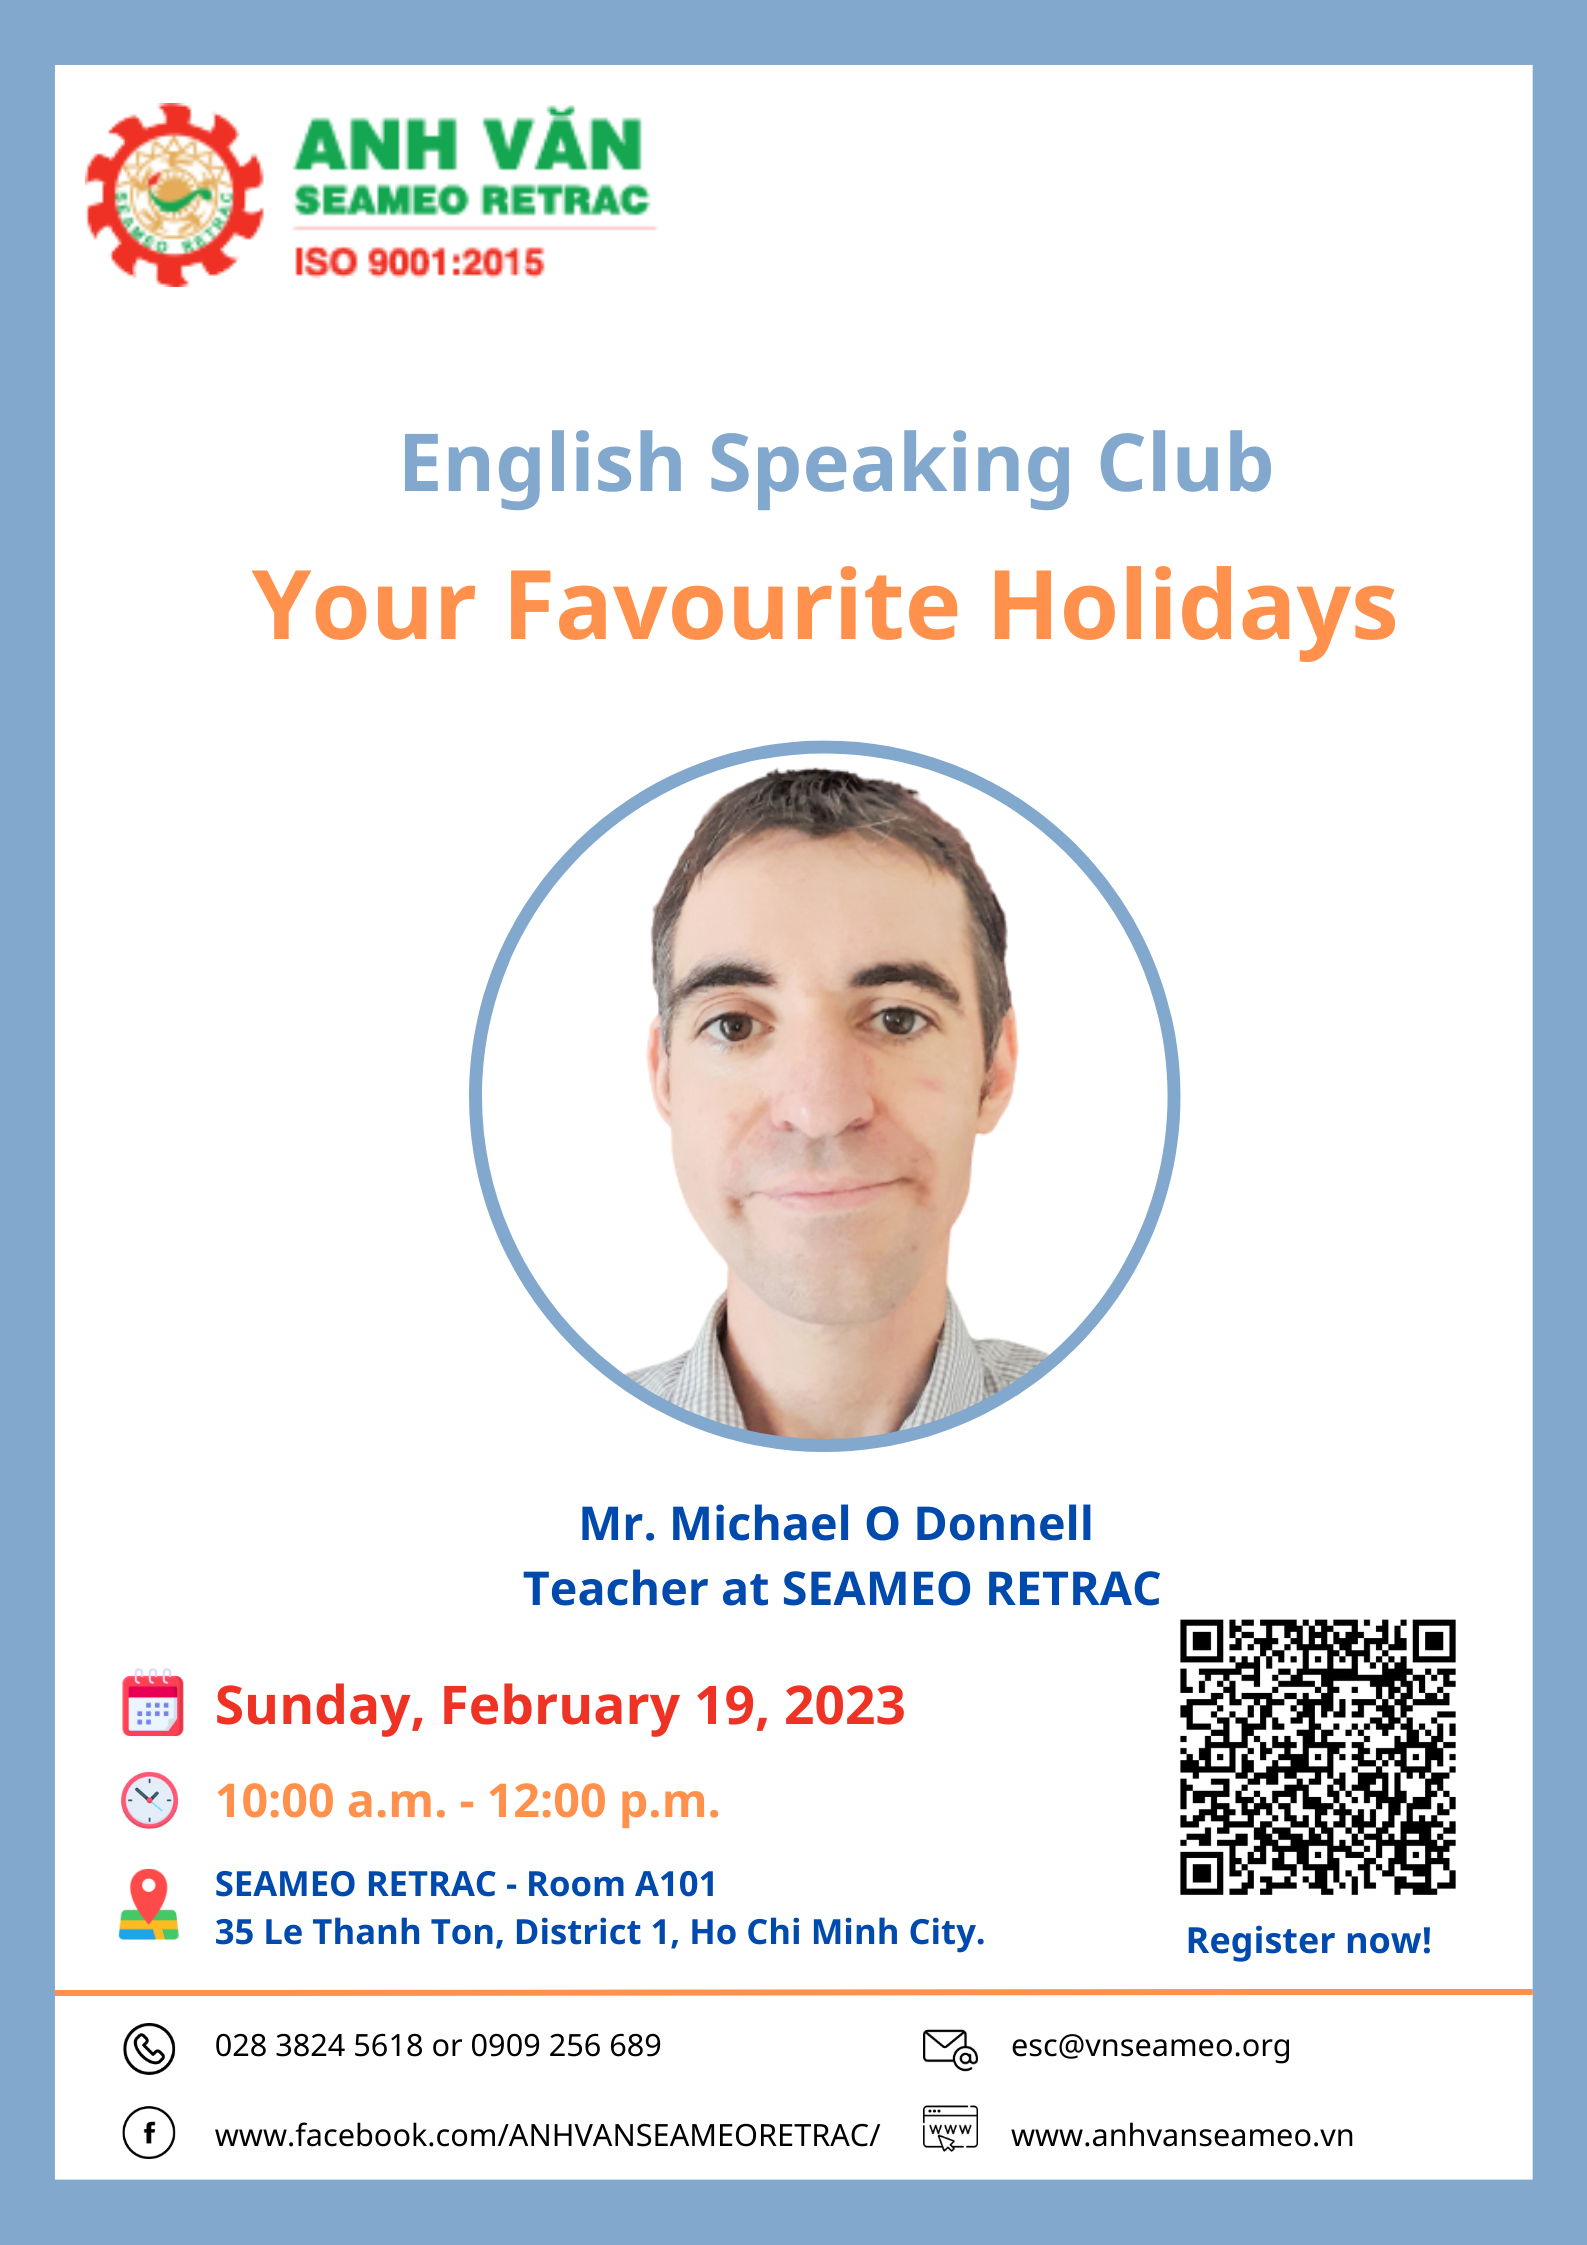 English Speaking Club titled “Your Favorite Holidays”